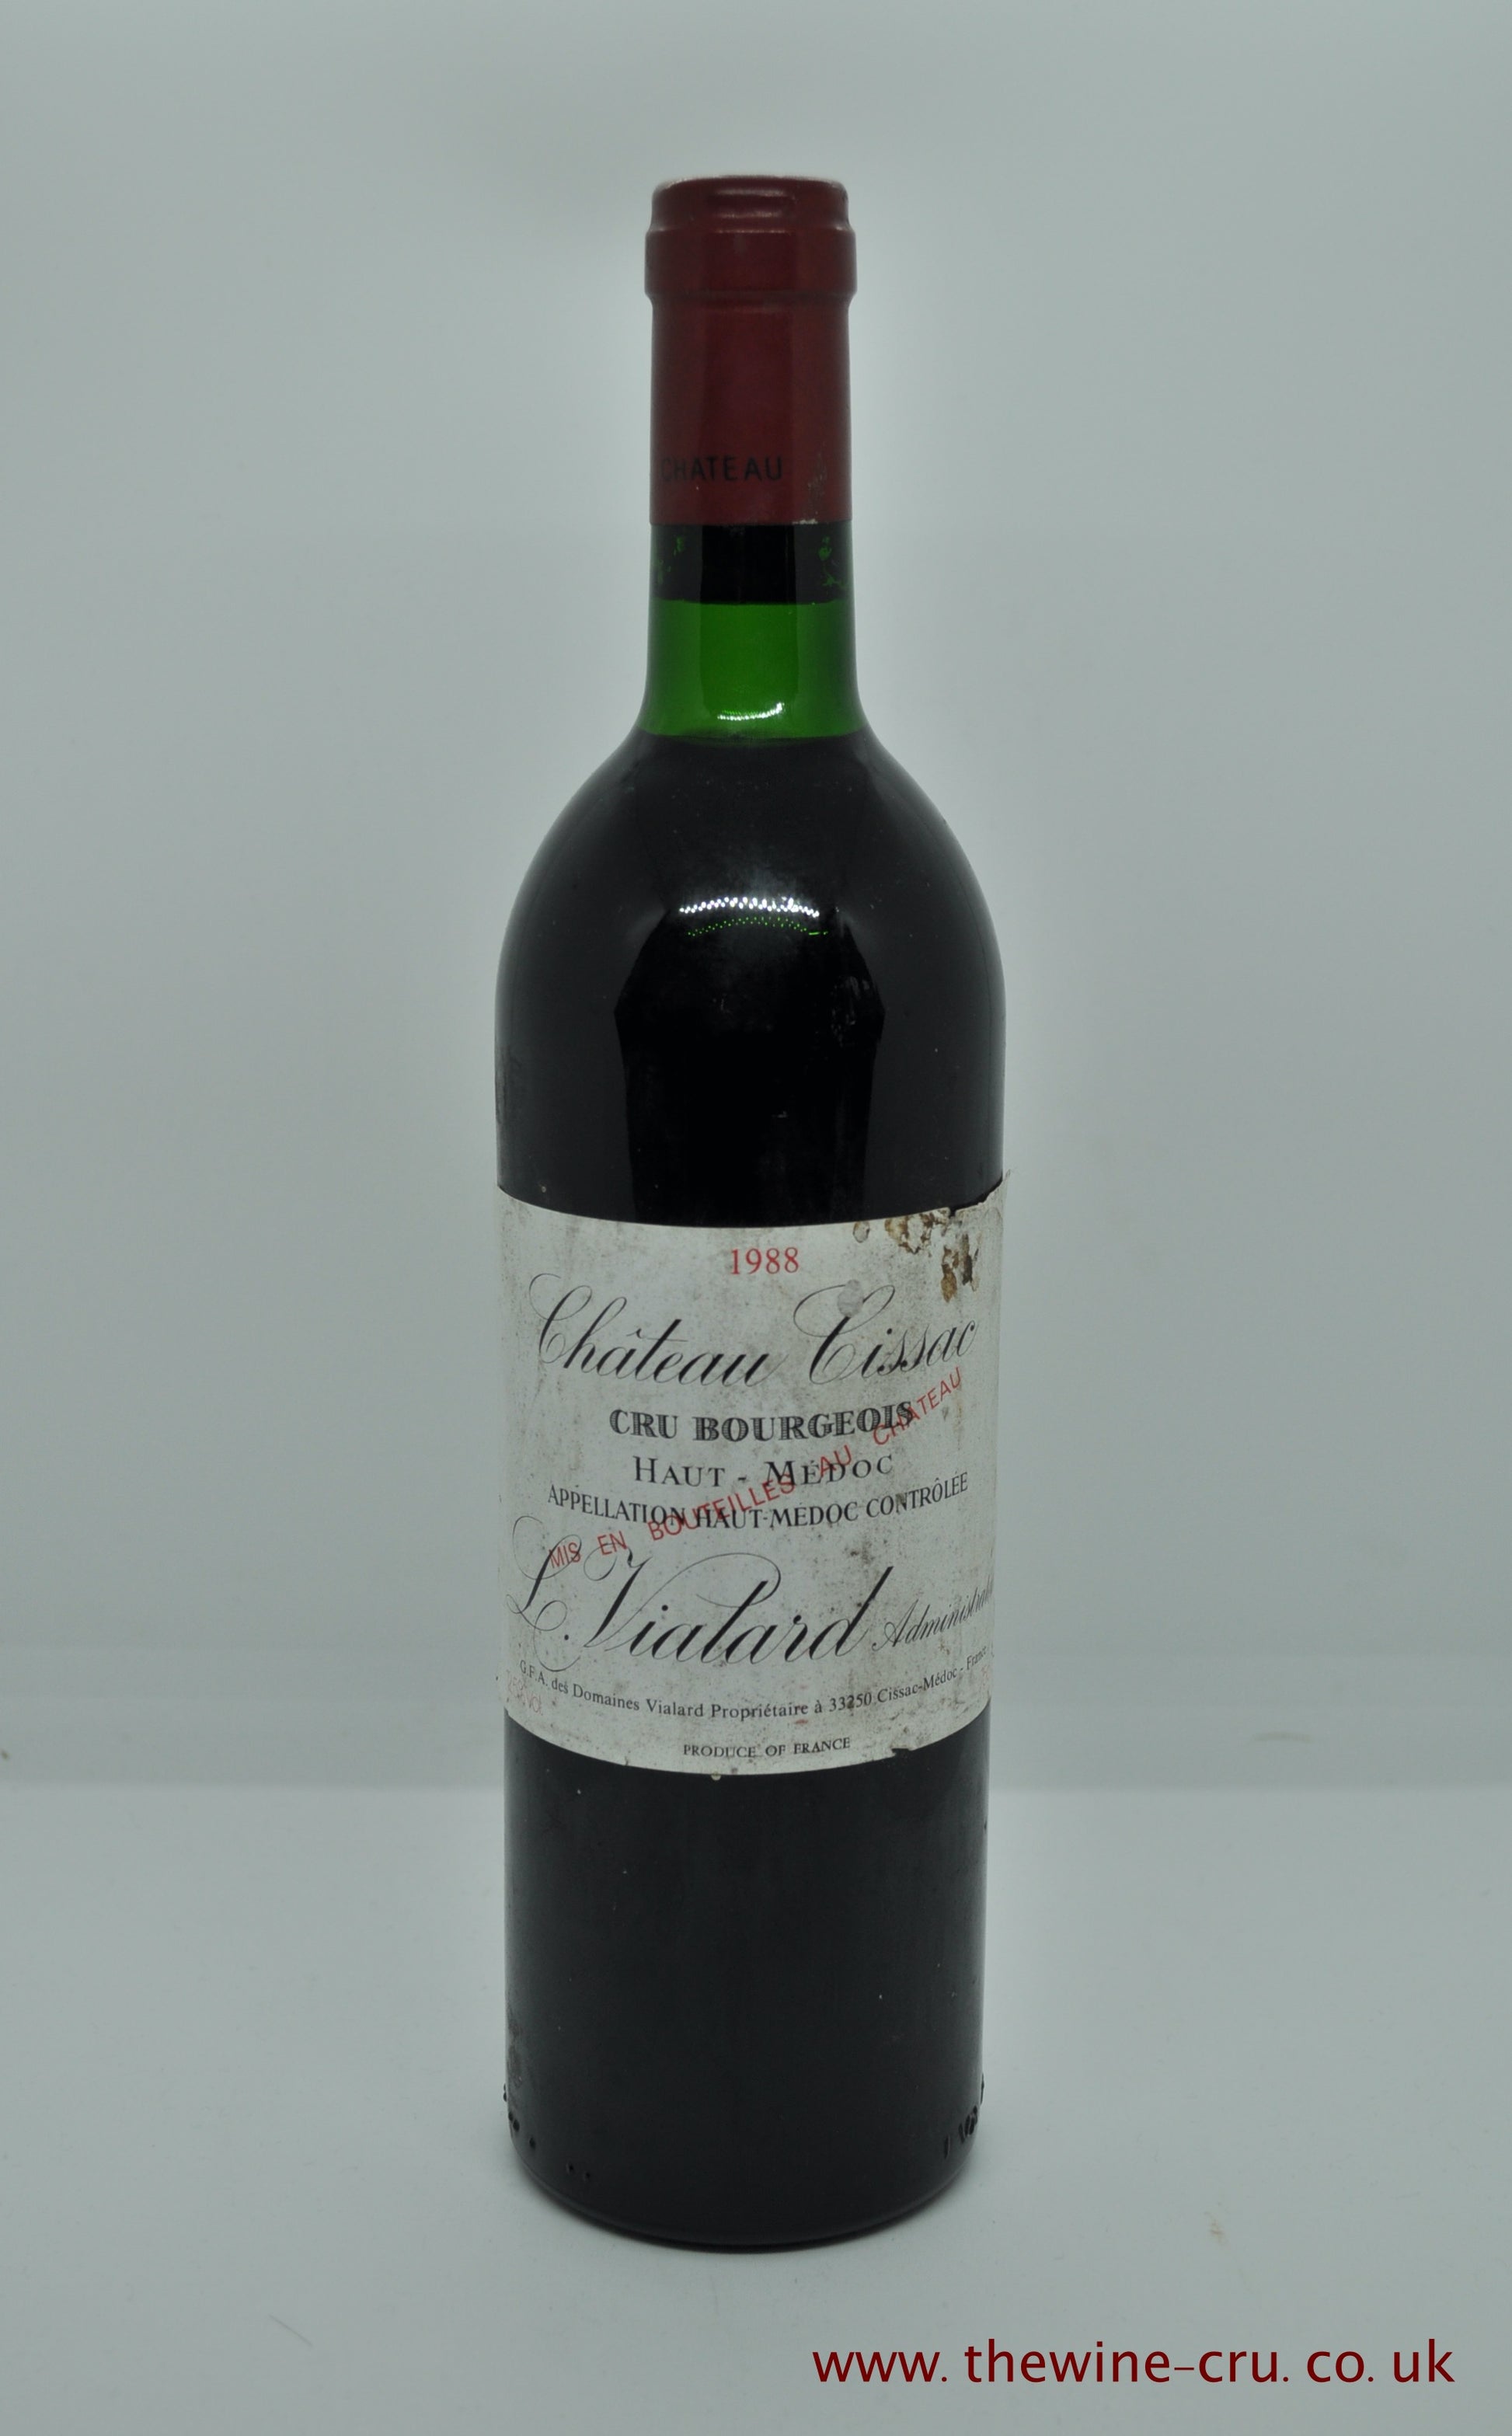 A bottle of 1988 vintage red wine. Chateau Cissac 1988 France Bordeaux. The bottle is in good condition with the wine level being base of neck. Immediate delivery. Free local delivery. Gift wrapping available.